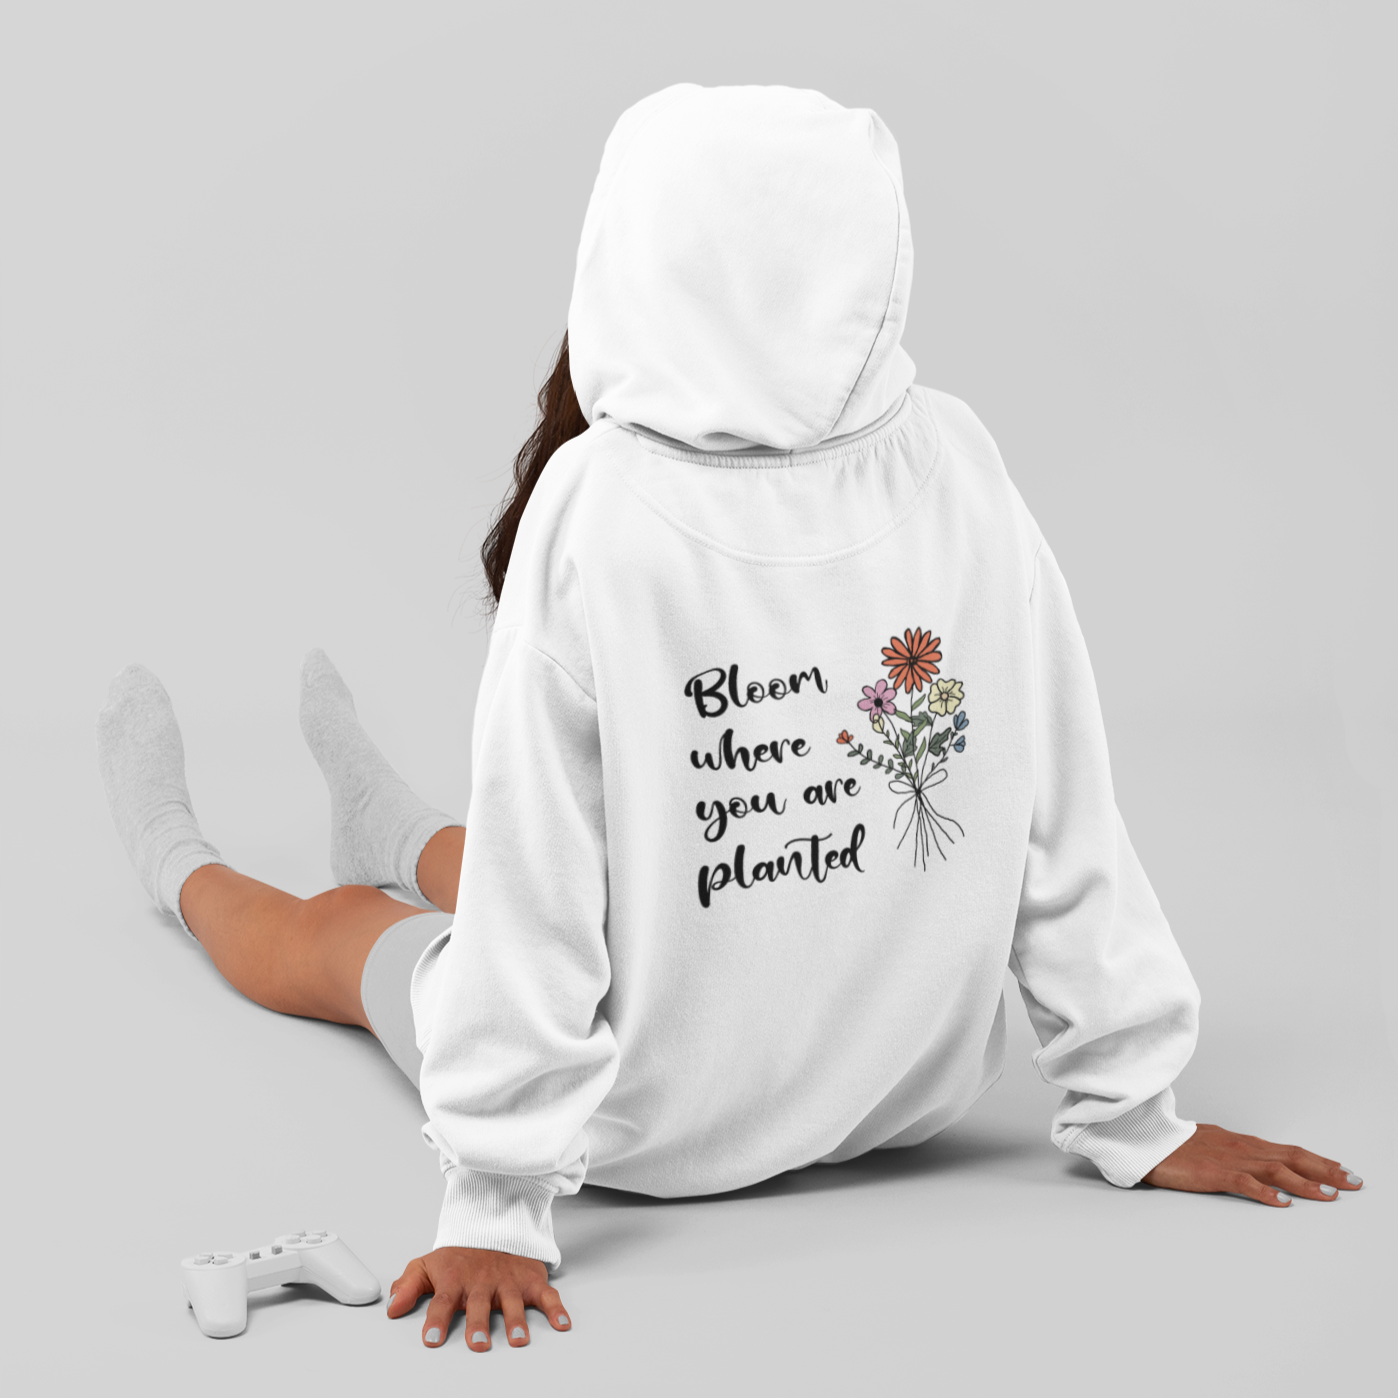 Bloom Where You are Planted -  Full Color Heat Transfer